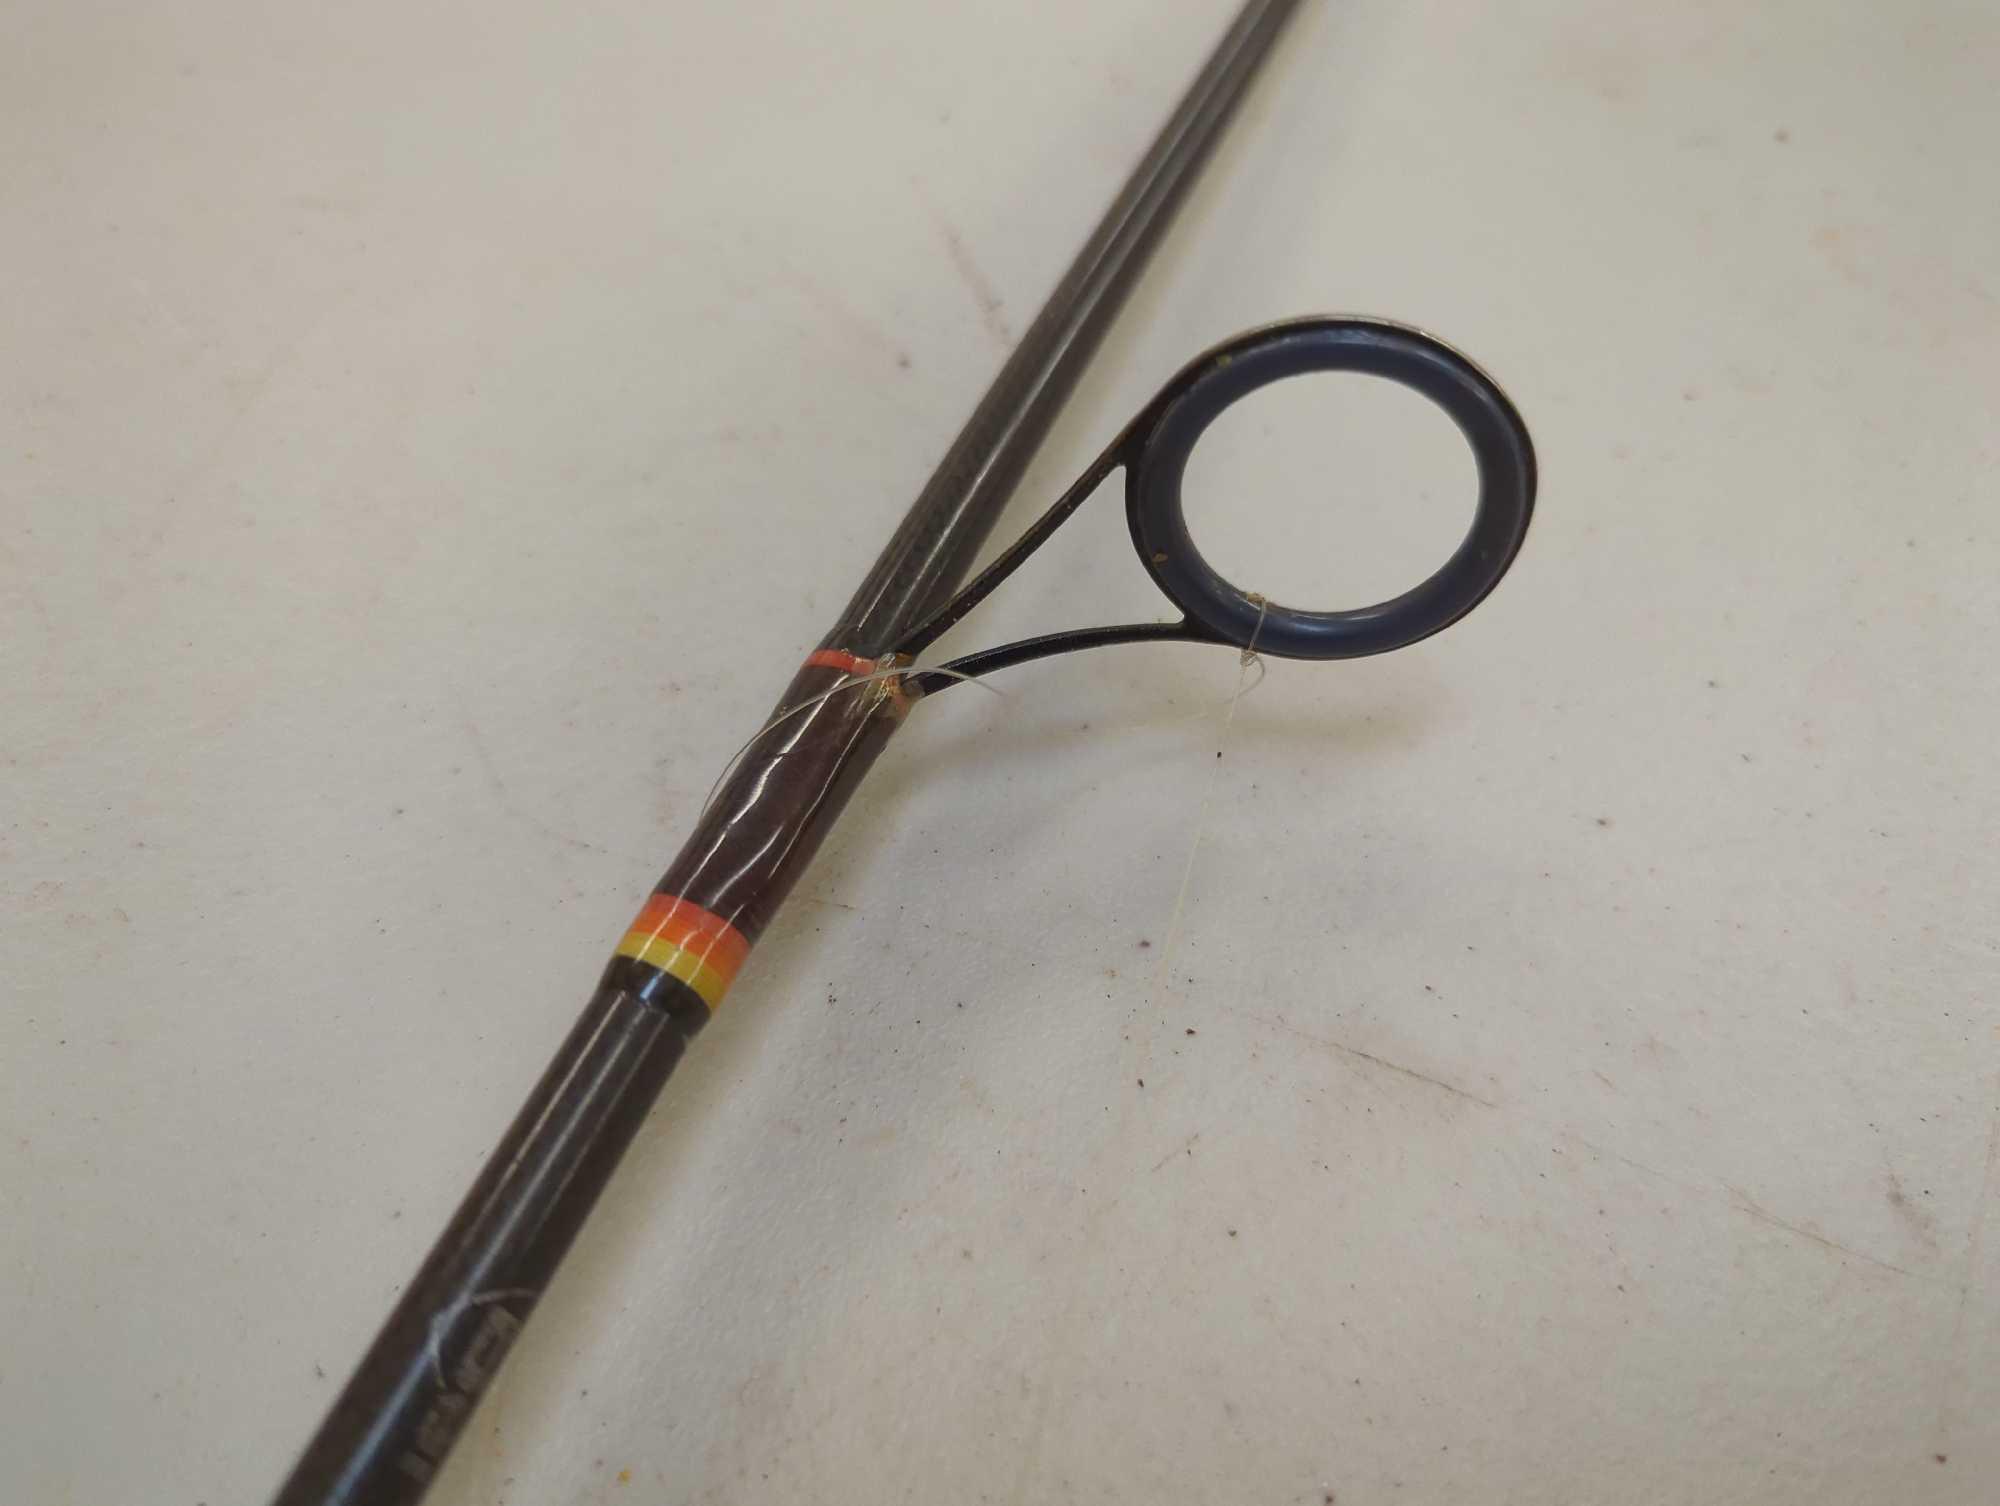 Berkley 5'4" lightning rod. Lure 1/4-5/8 oz Comes as a shown in photos. Appears to be used.